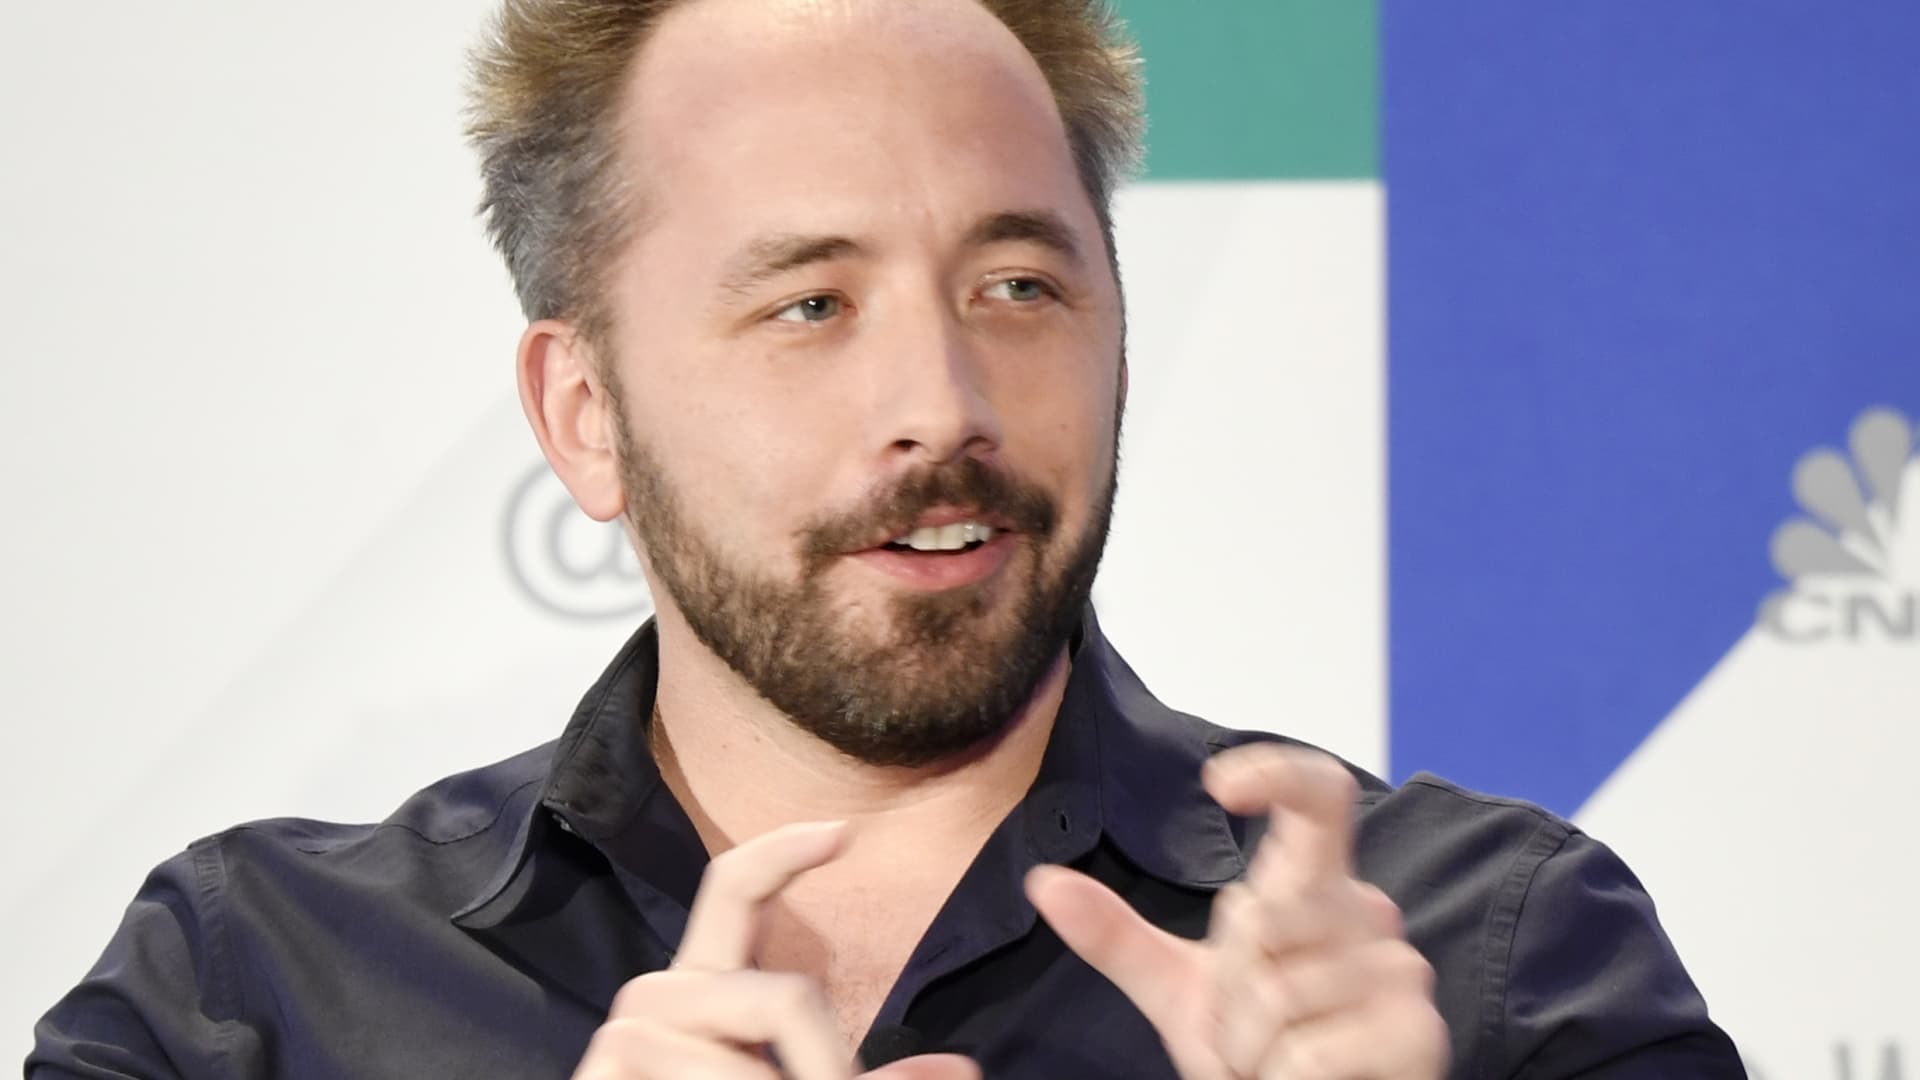 Dropbox CEO on the boomerang benefits of offering workers virtual-first jobs - CNBC